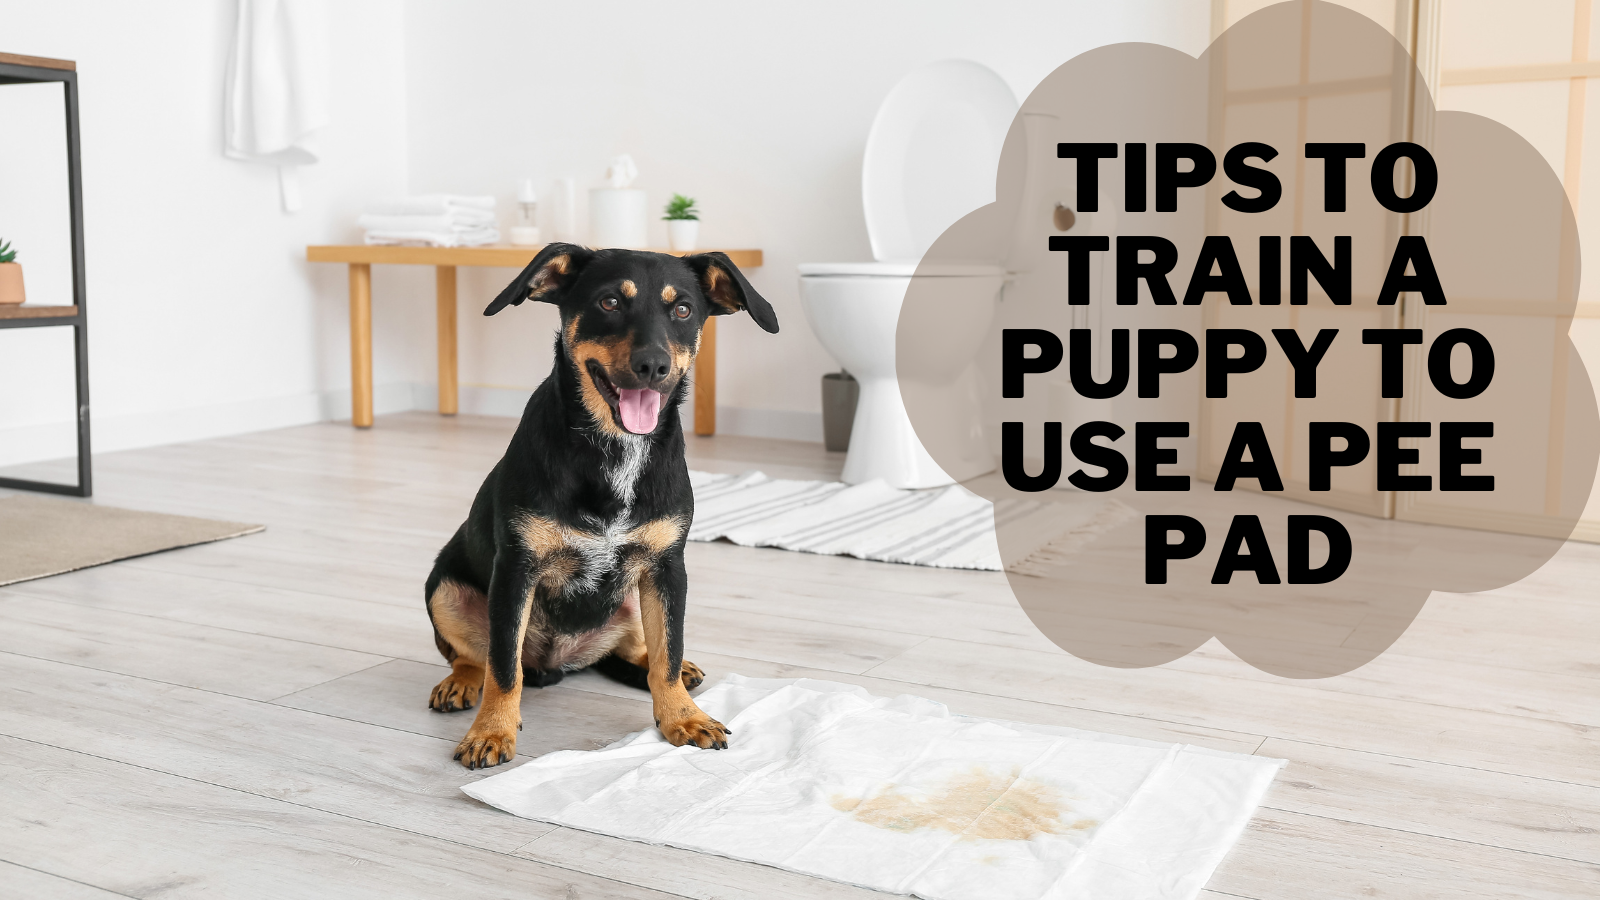 Best Tips To Train A Puppy To Use A Pee Pad